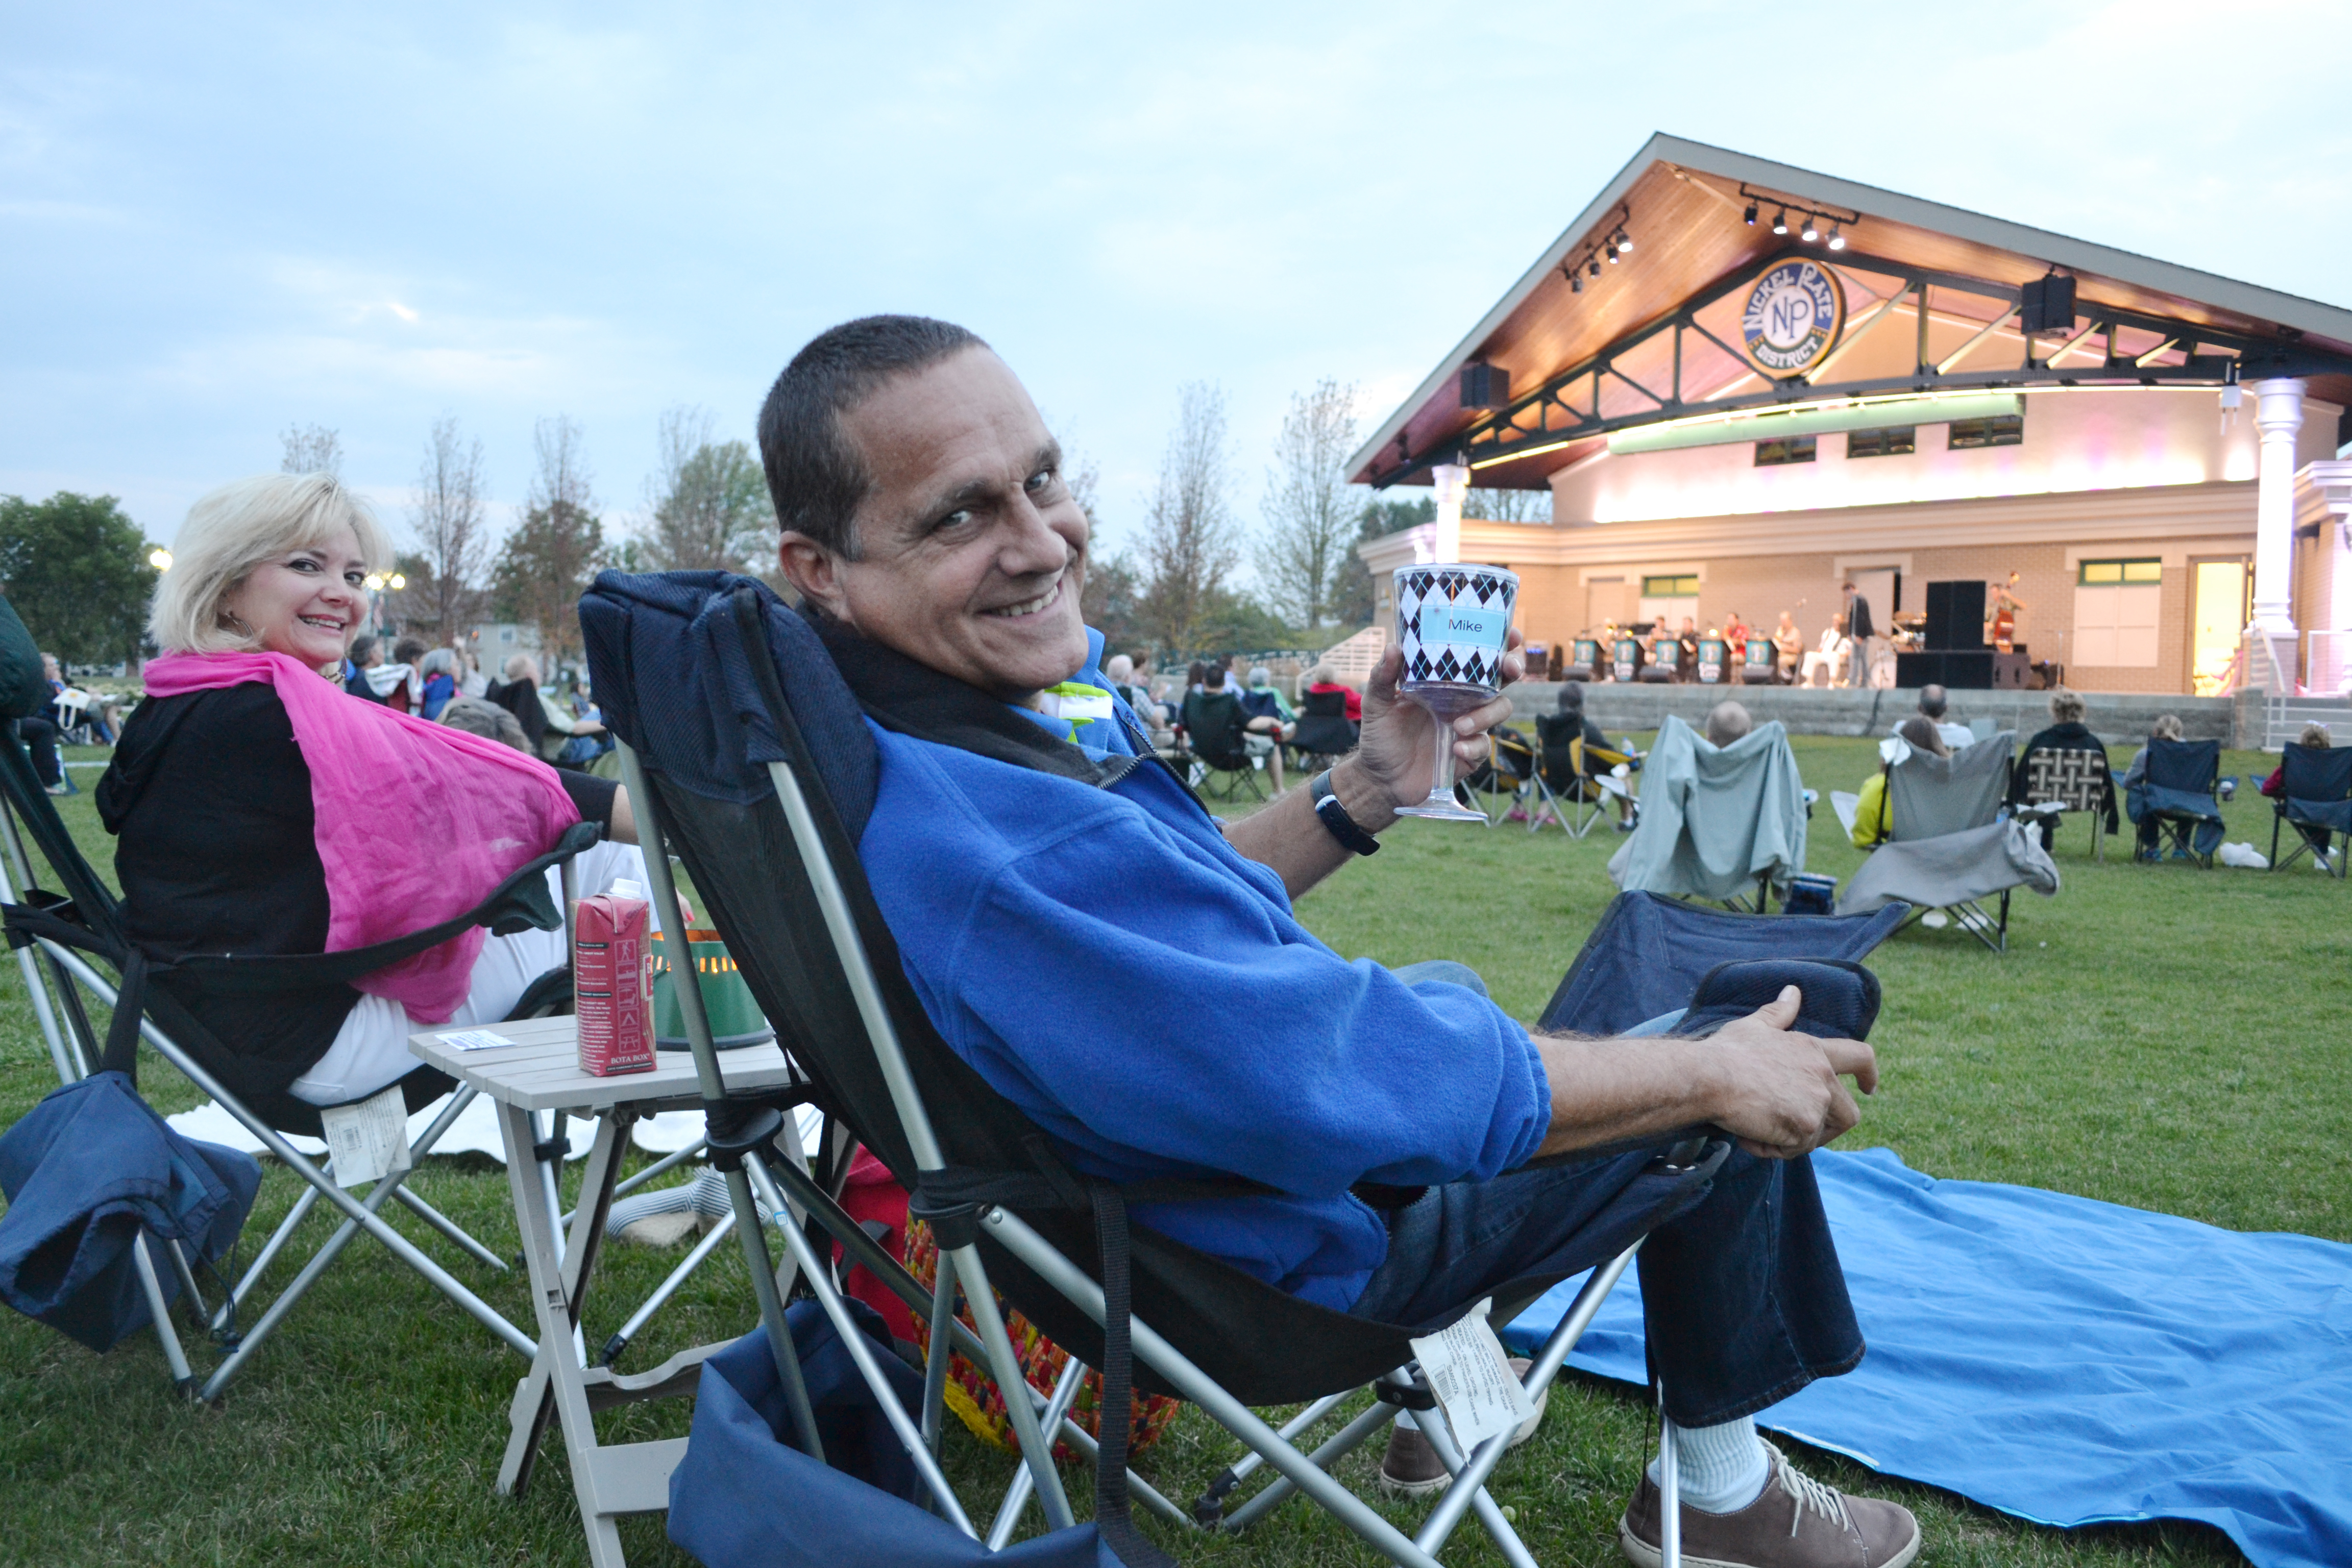 Mike and Janet Harris of Indianapolis enjoyed a picnic dinner and an evening of music at Fishers’ Amp After Dark Concert Series Aug. 1. (Photo by John Cinnamon) Amp After Dark i